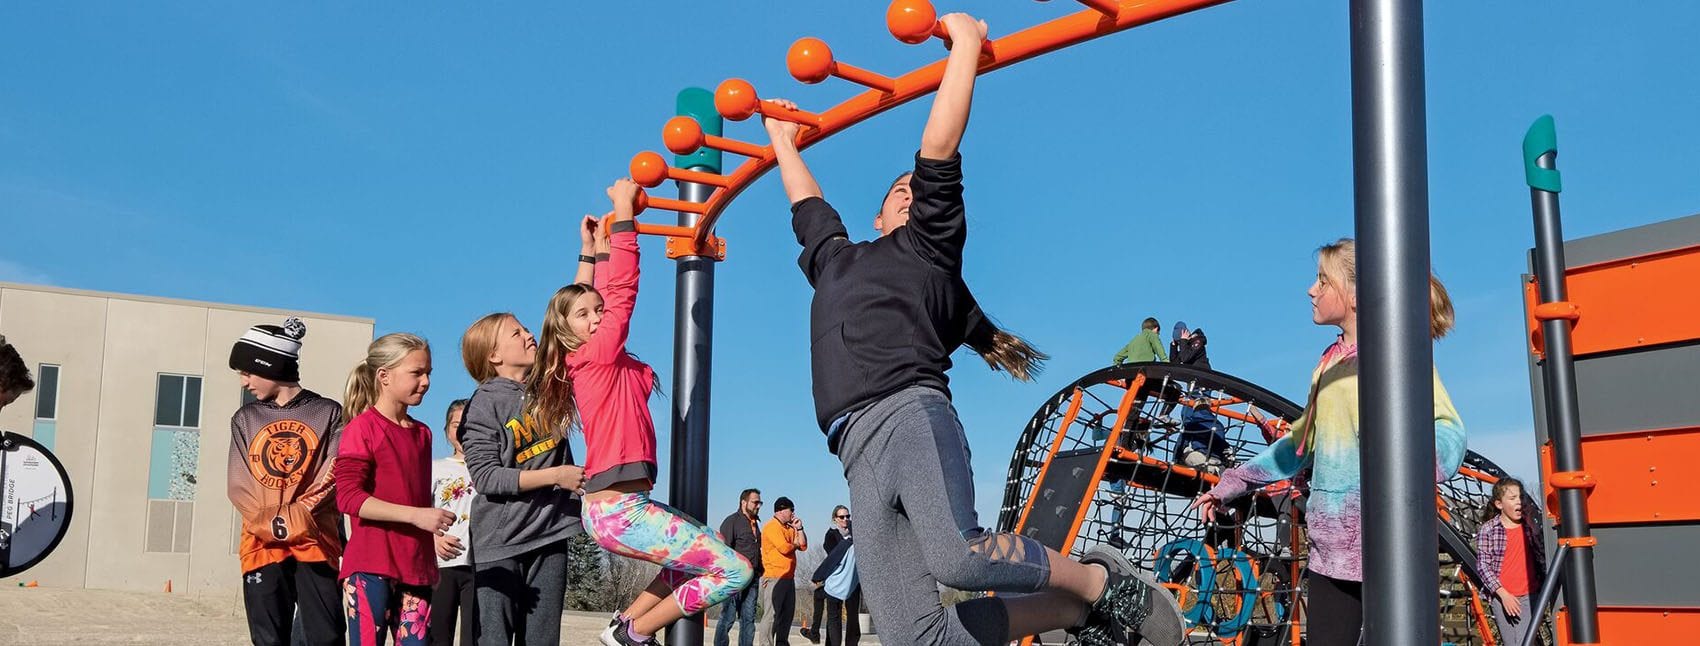 Outdoor Exercise Equipment - PlayCreation - HealthBeat® and FitCore™